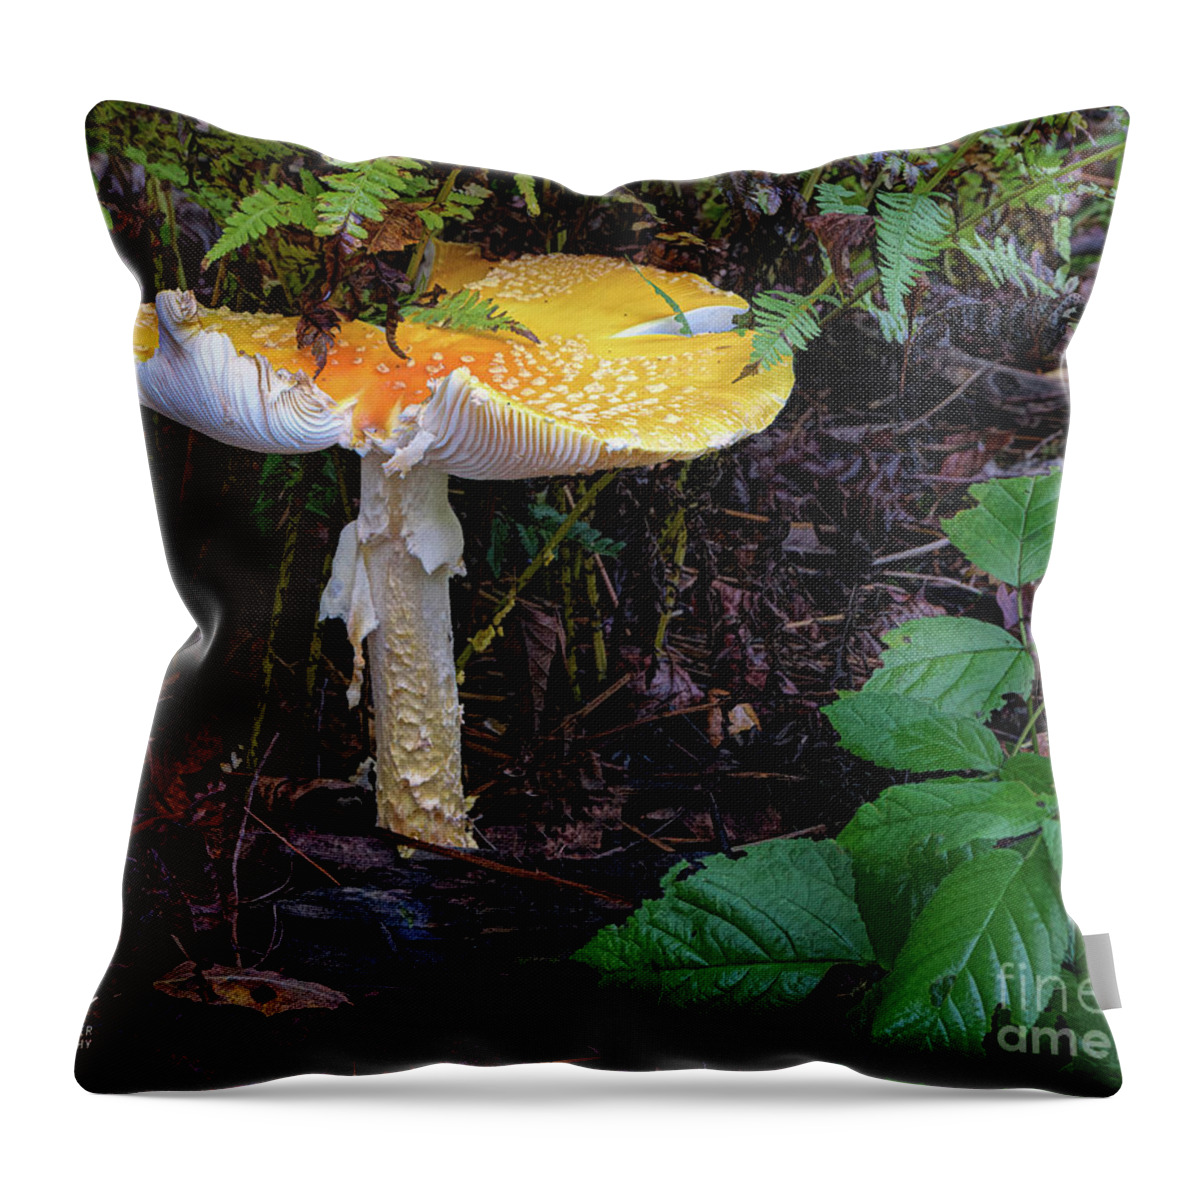 Fungi Throw Pillow featuring the photograph Giant Fly Agaric Mushroom by Trey Foerster